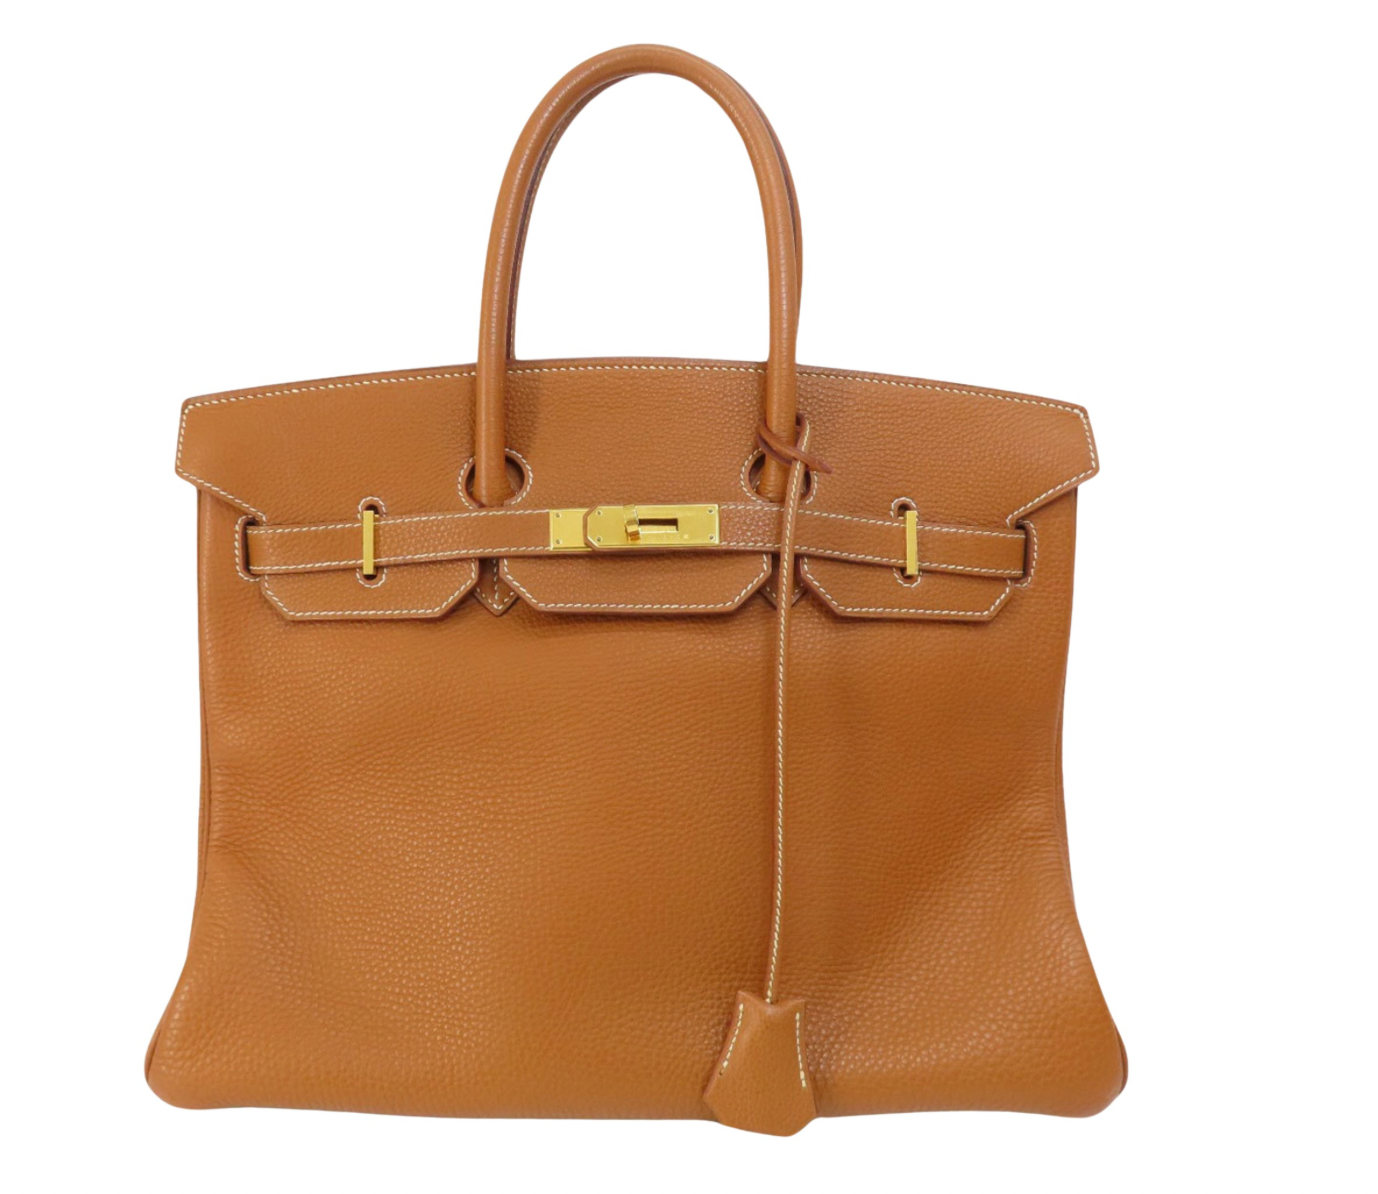 Pre-owned Hermes Birkin 35 handbag is made from Fauve Barenia Faubourg Togo leather with contrasting stitching and palladium hardware